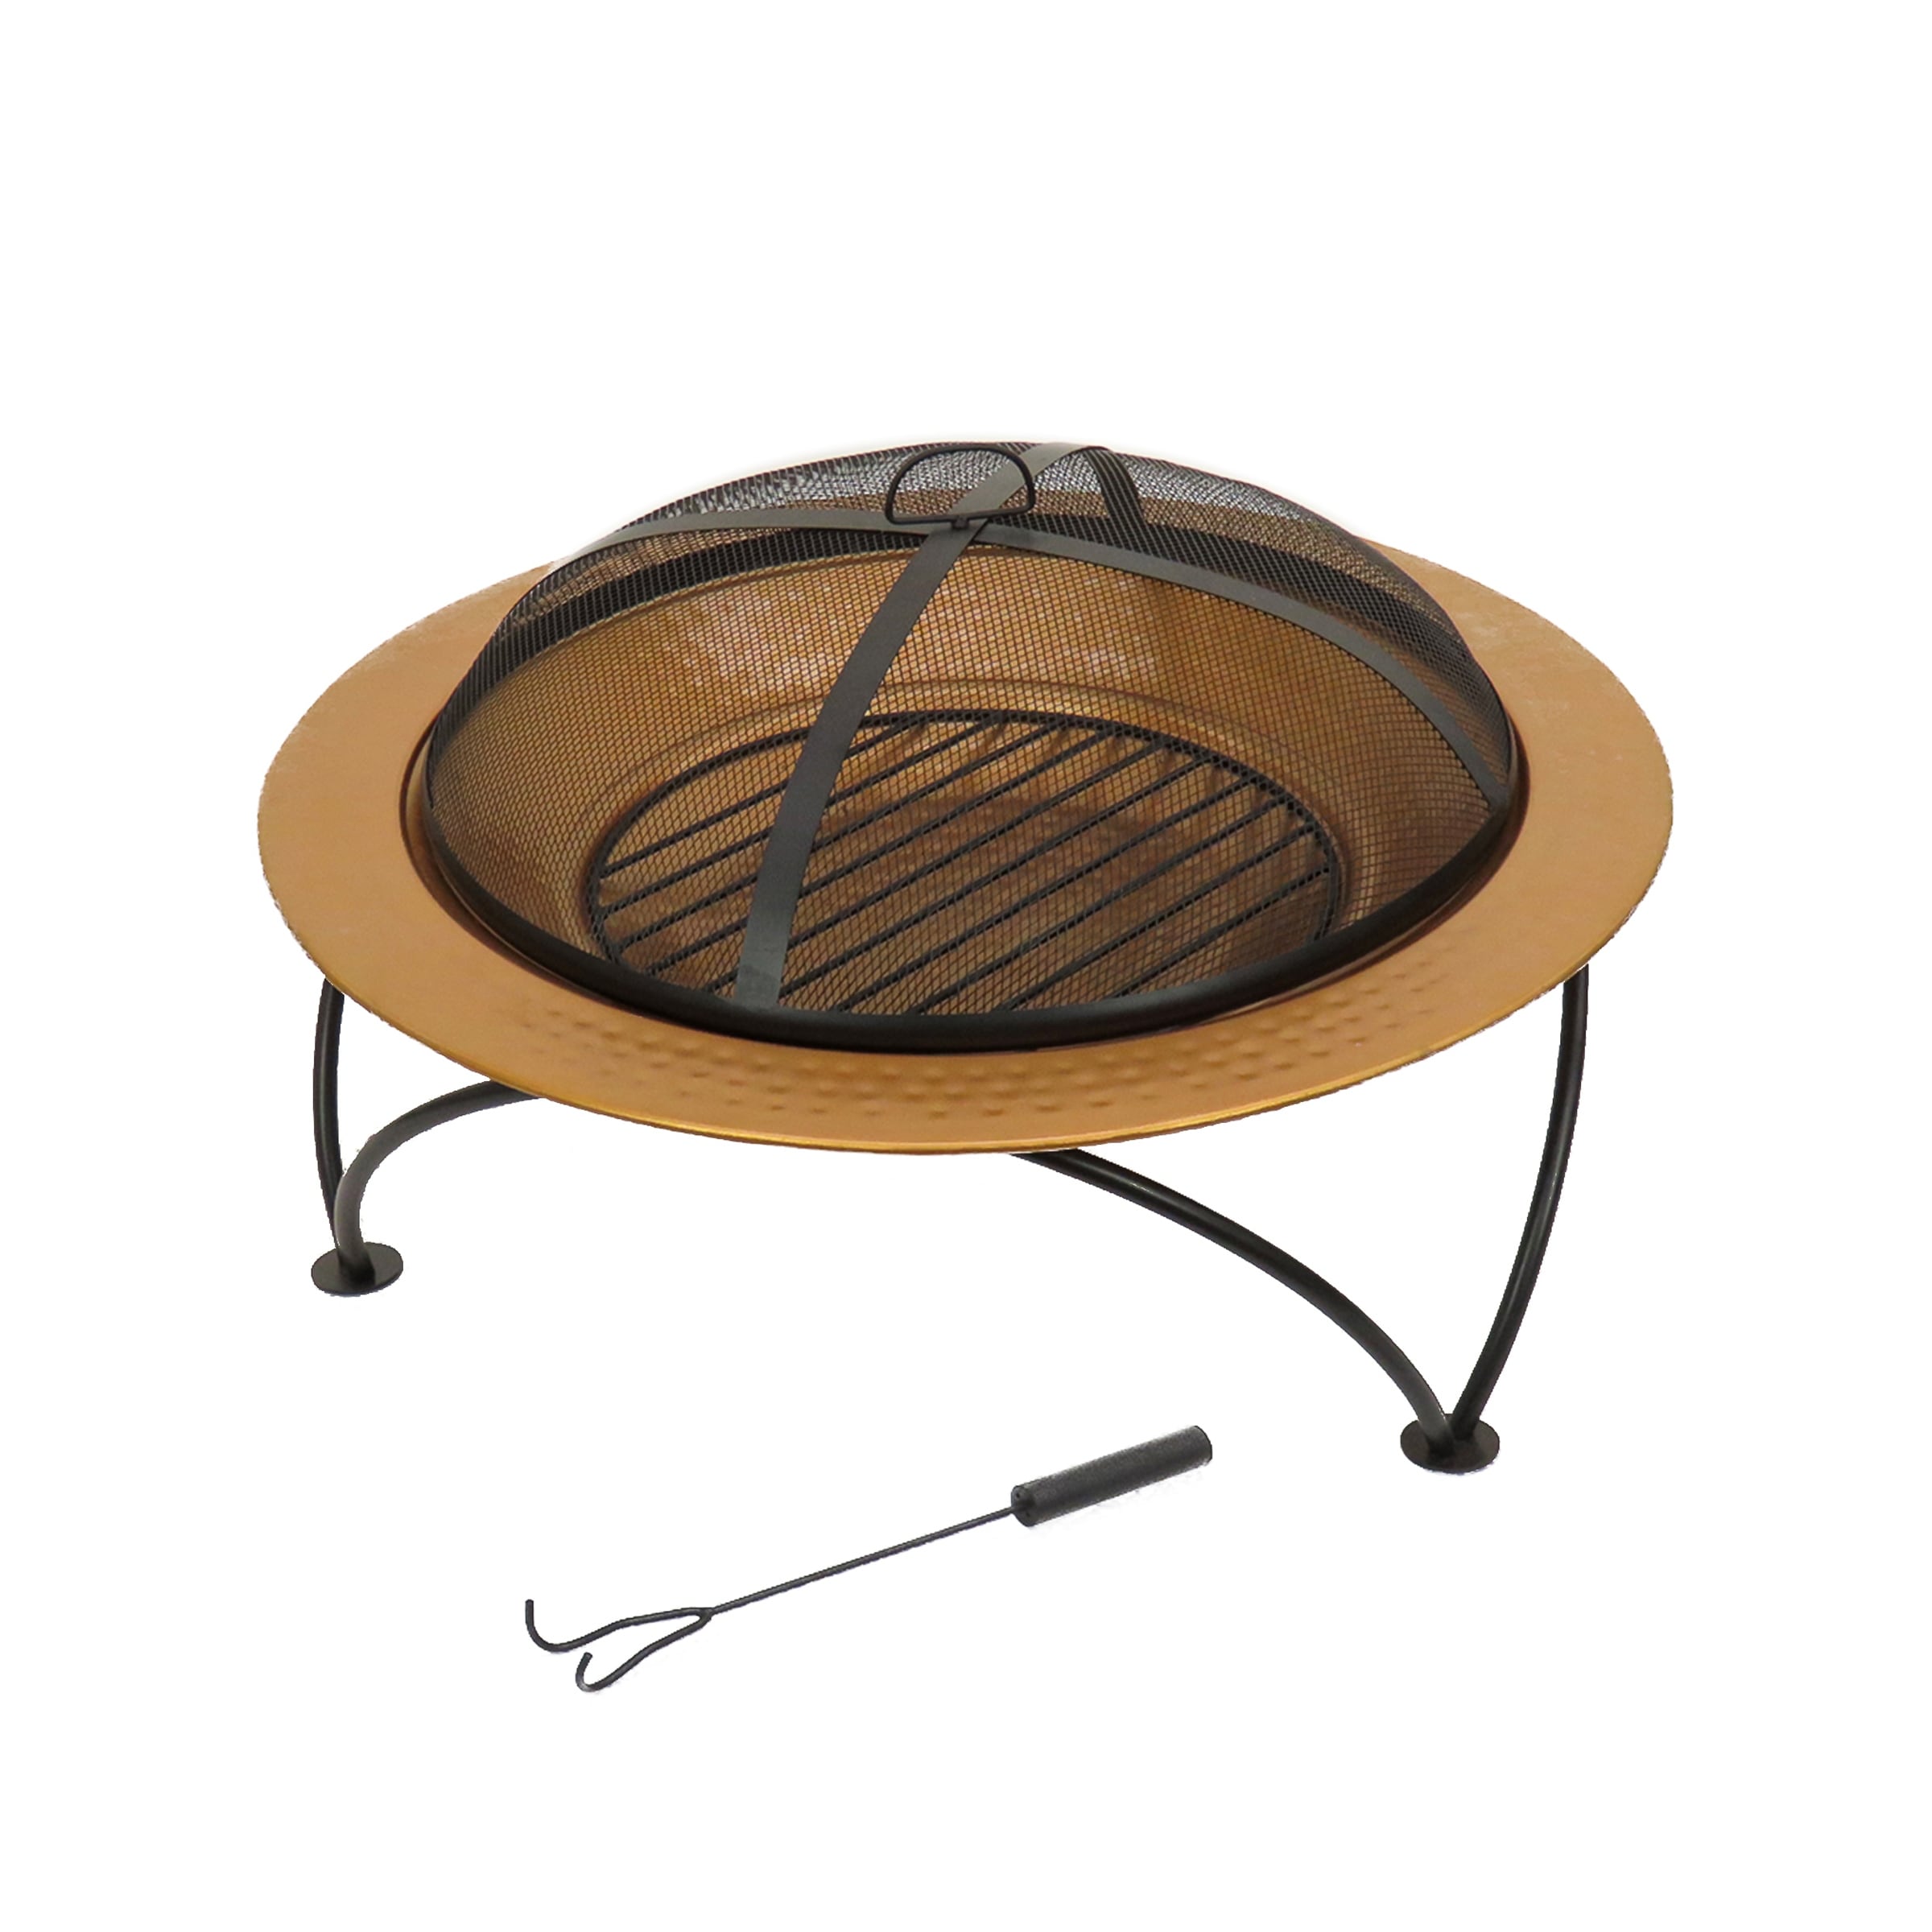 Natioanl Tree Co. 33 inch Hammered Copper Fire Pit with Stand and Screen